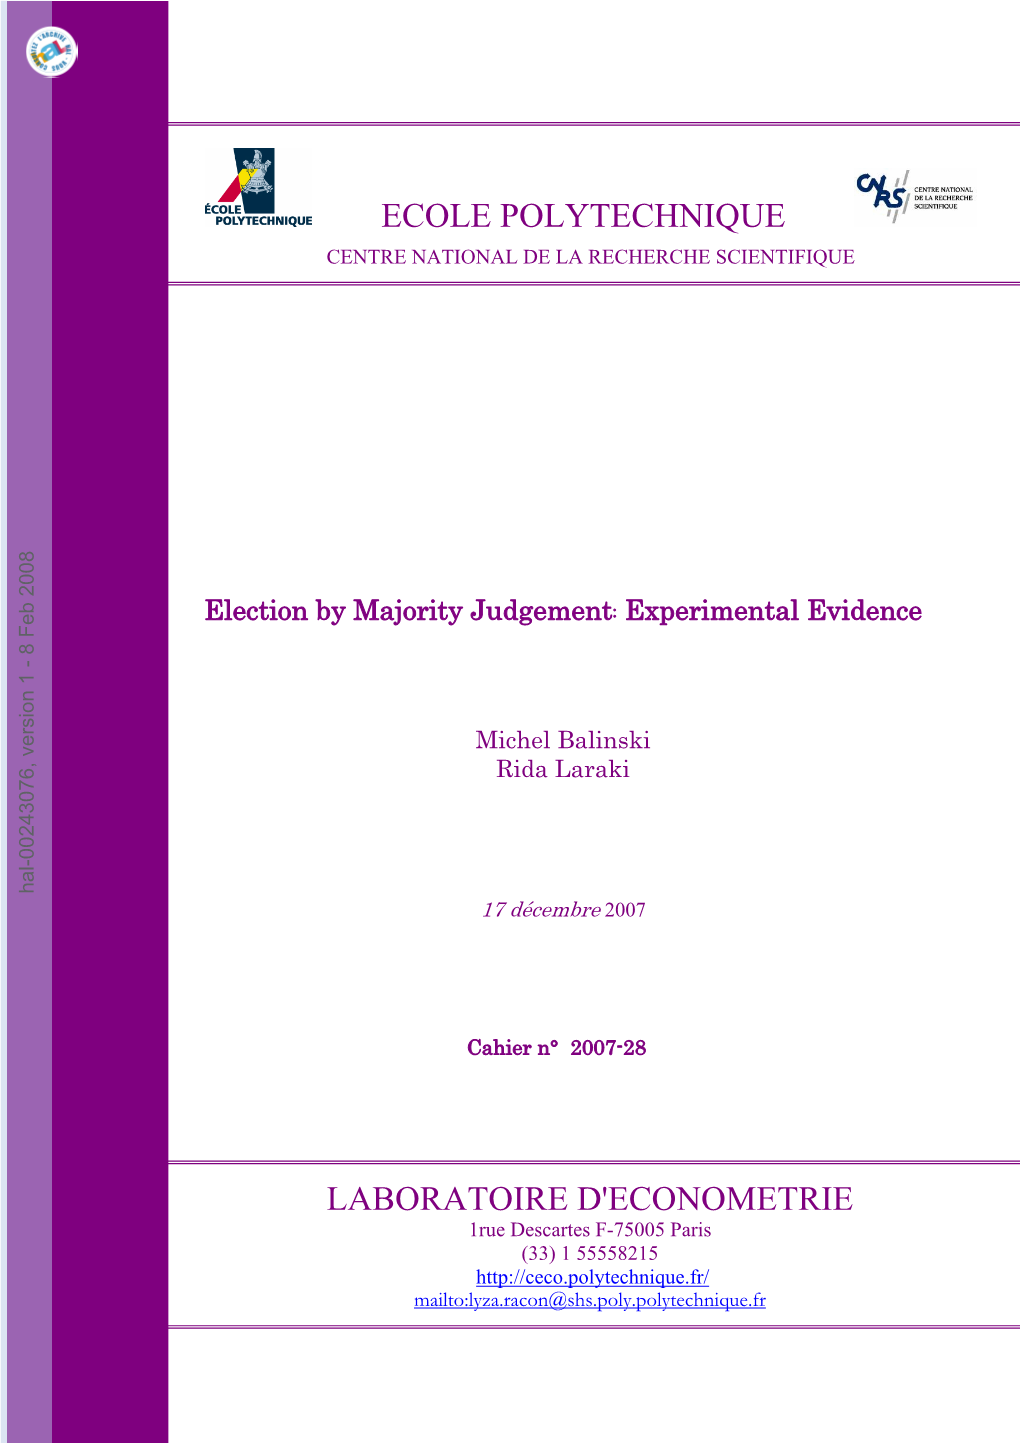 Election by Majority Judgement: Experimental Evidence